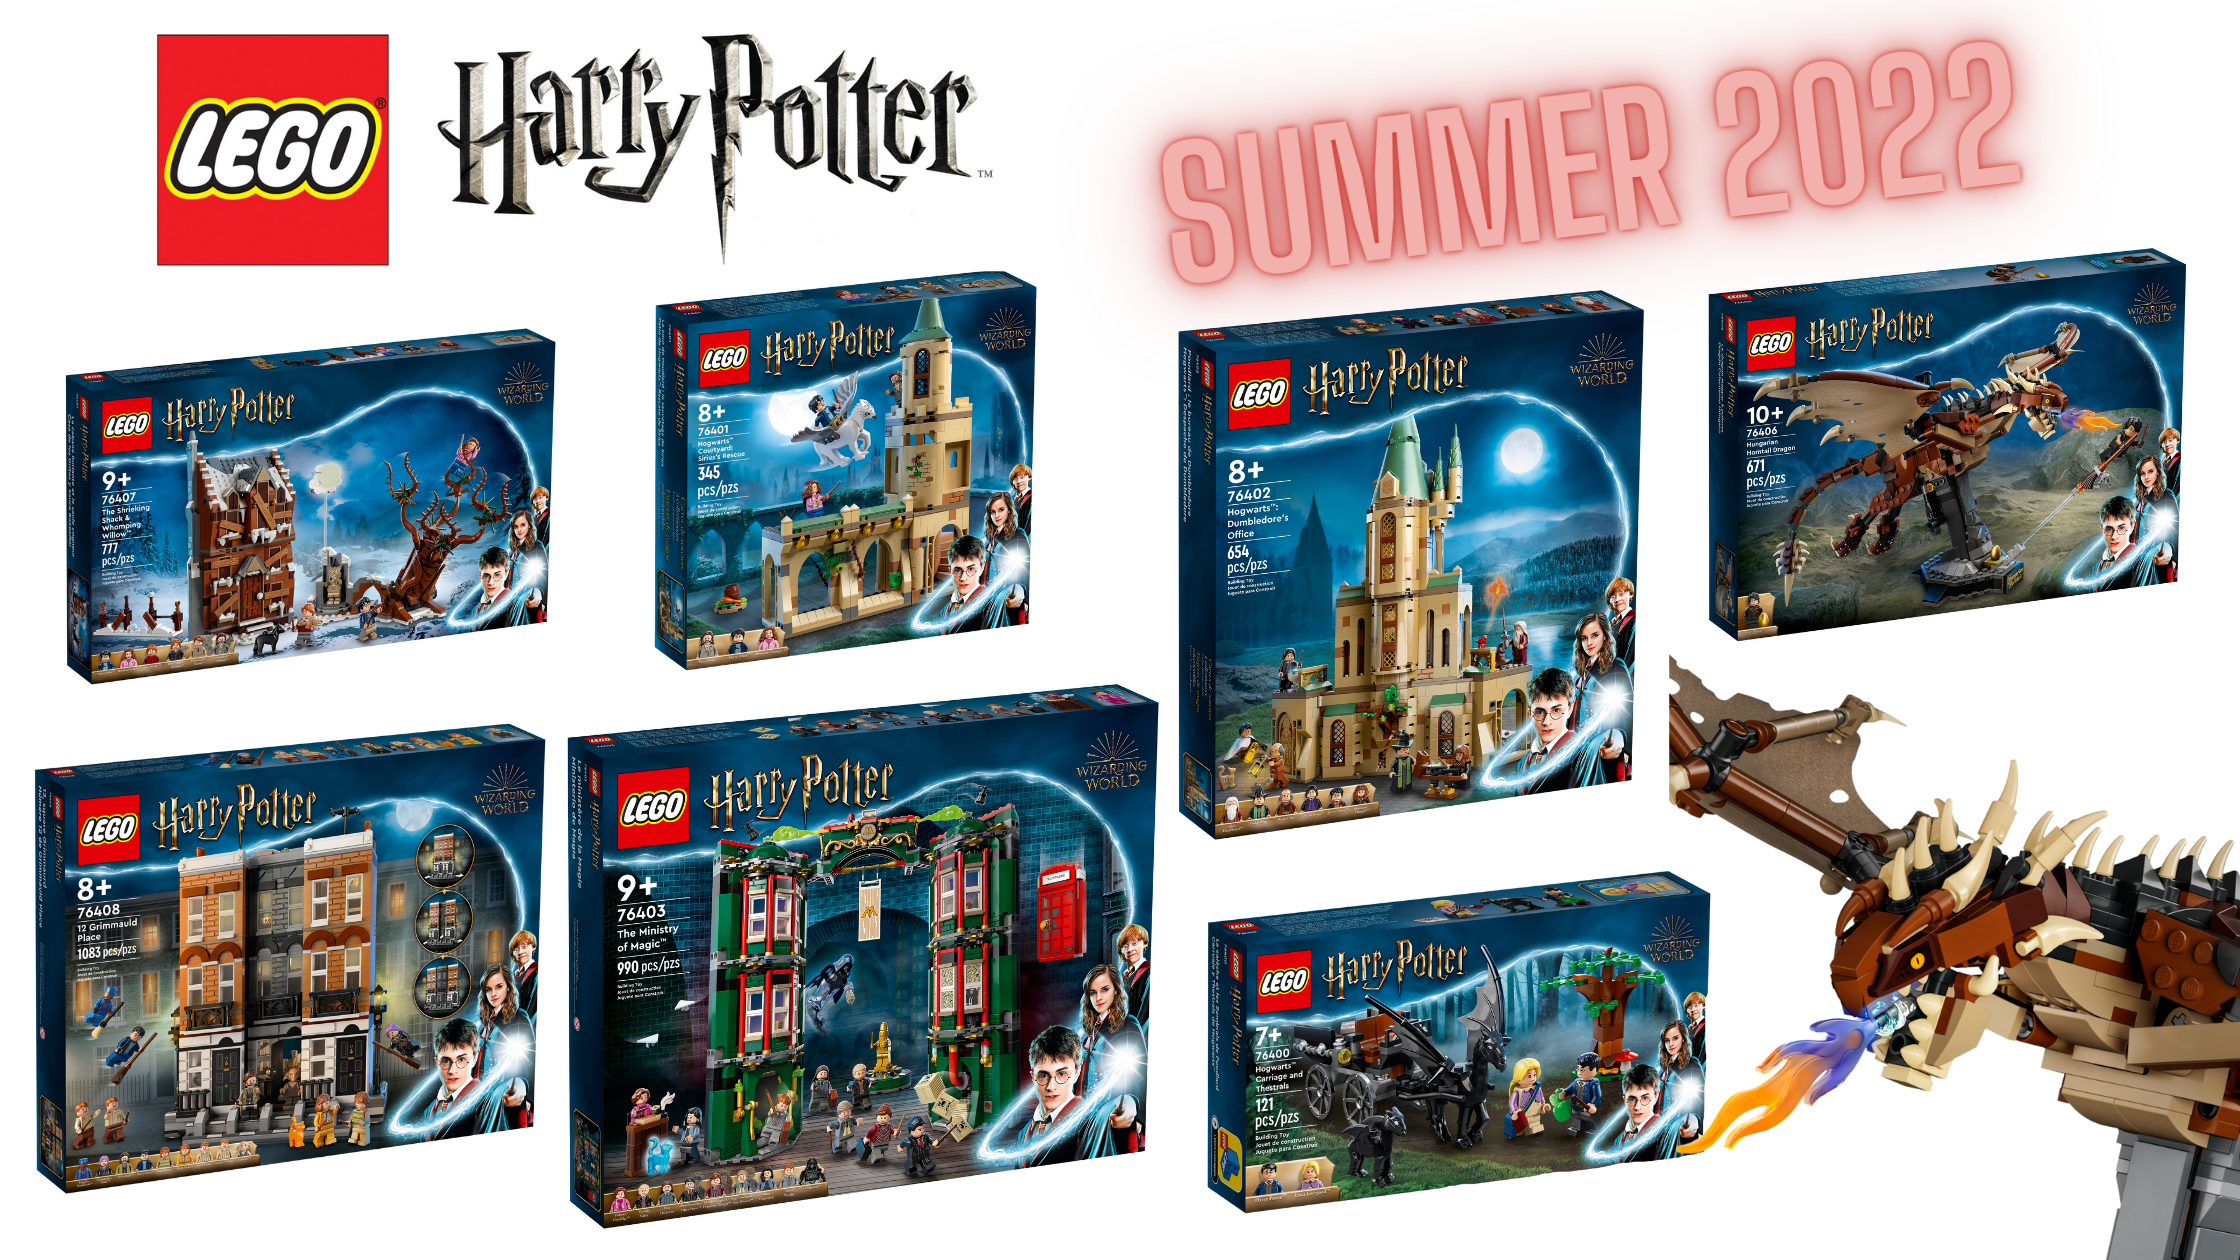 Harry Potter Lego 2022 Guide to all the new Summer 2022 LEGO Harry Potter Sets - Jay's Brick Blog